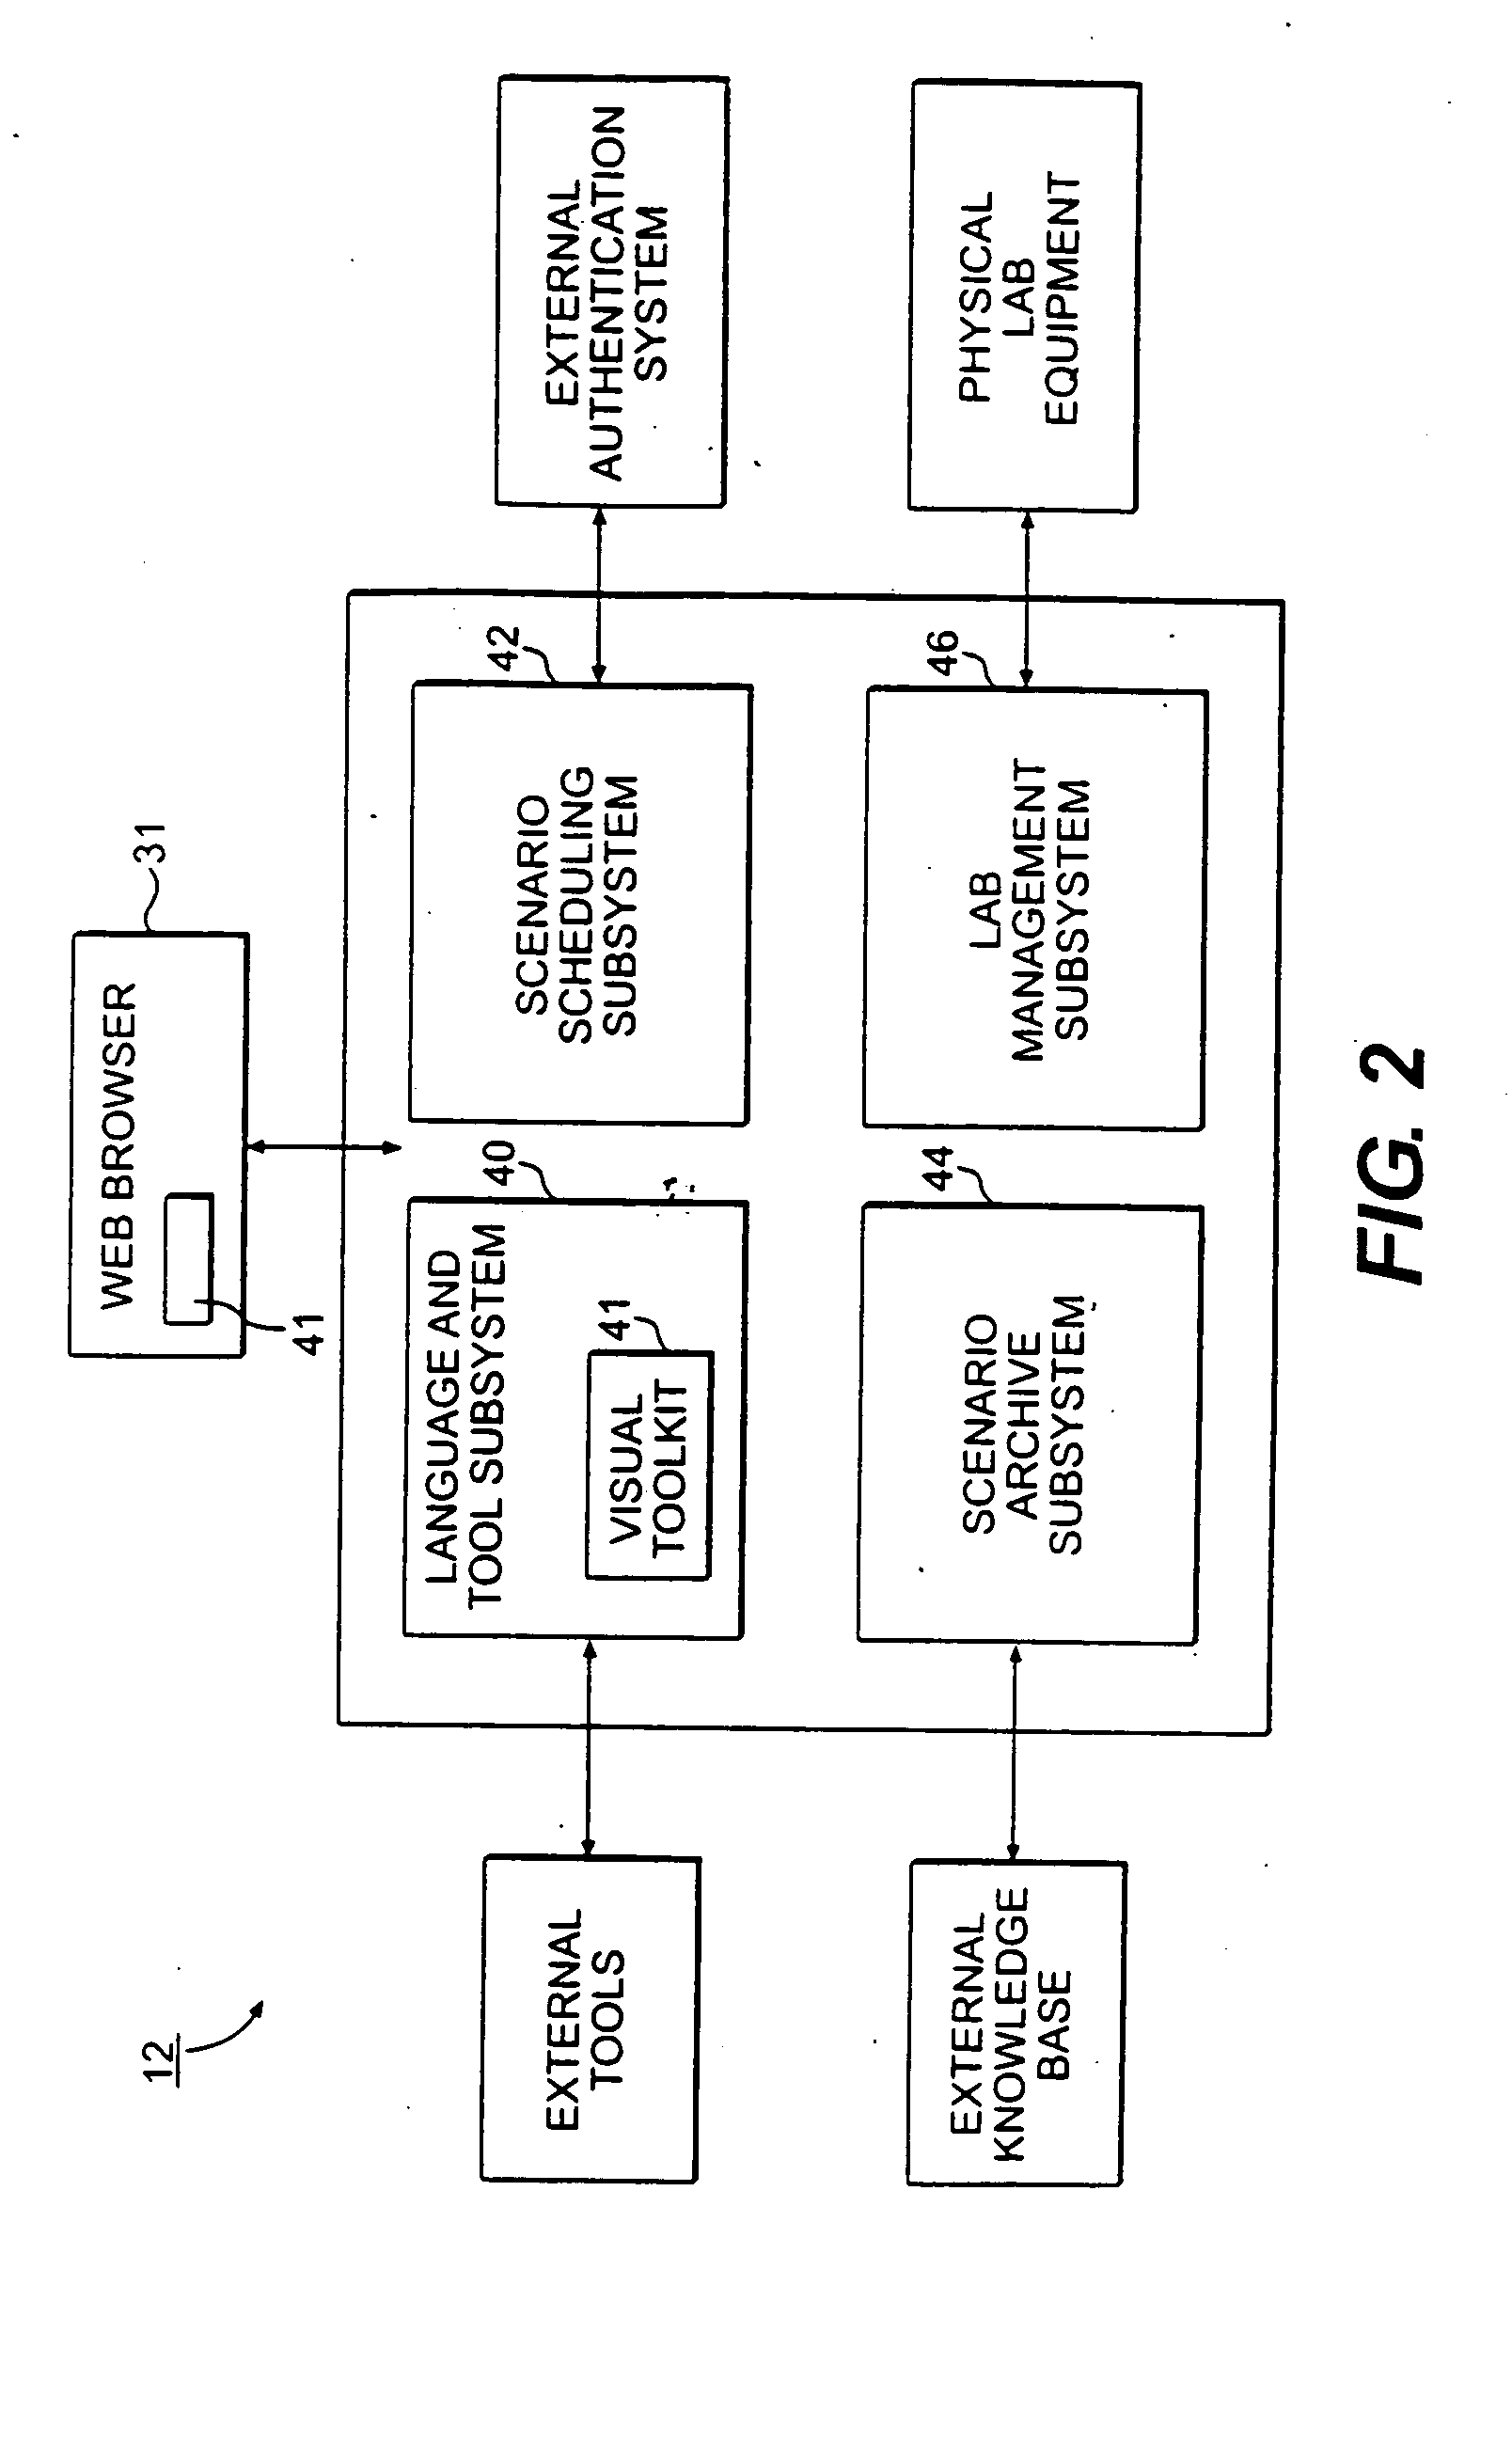 System and method for remotely configuring devices for testing scenarios